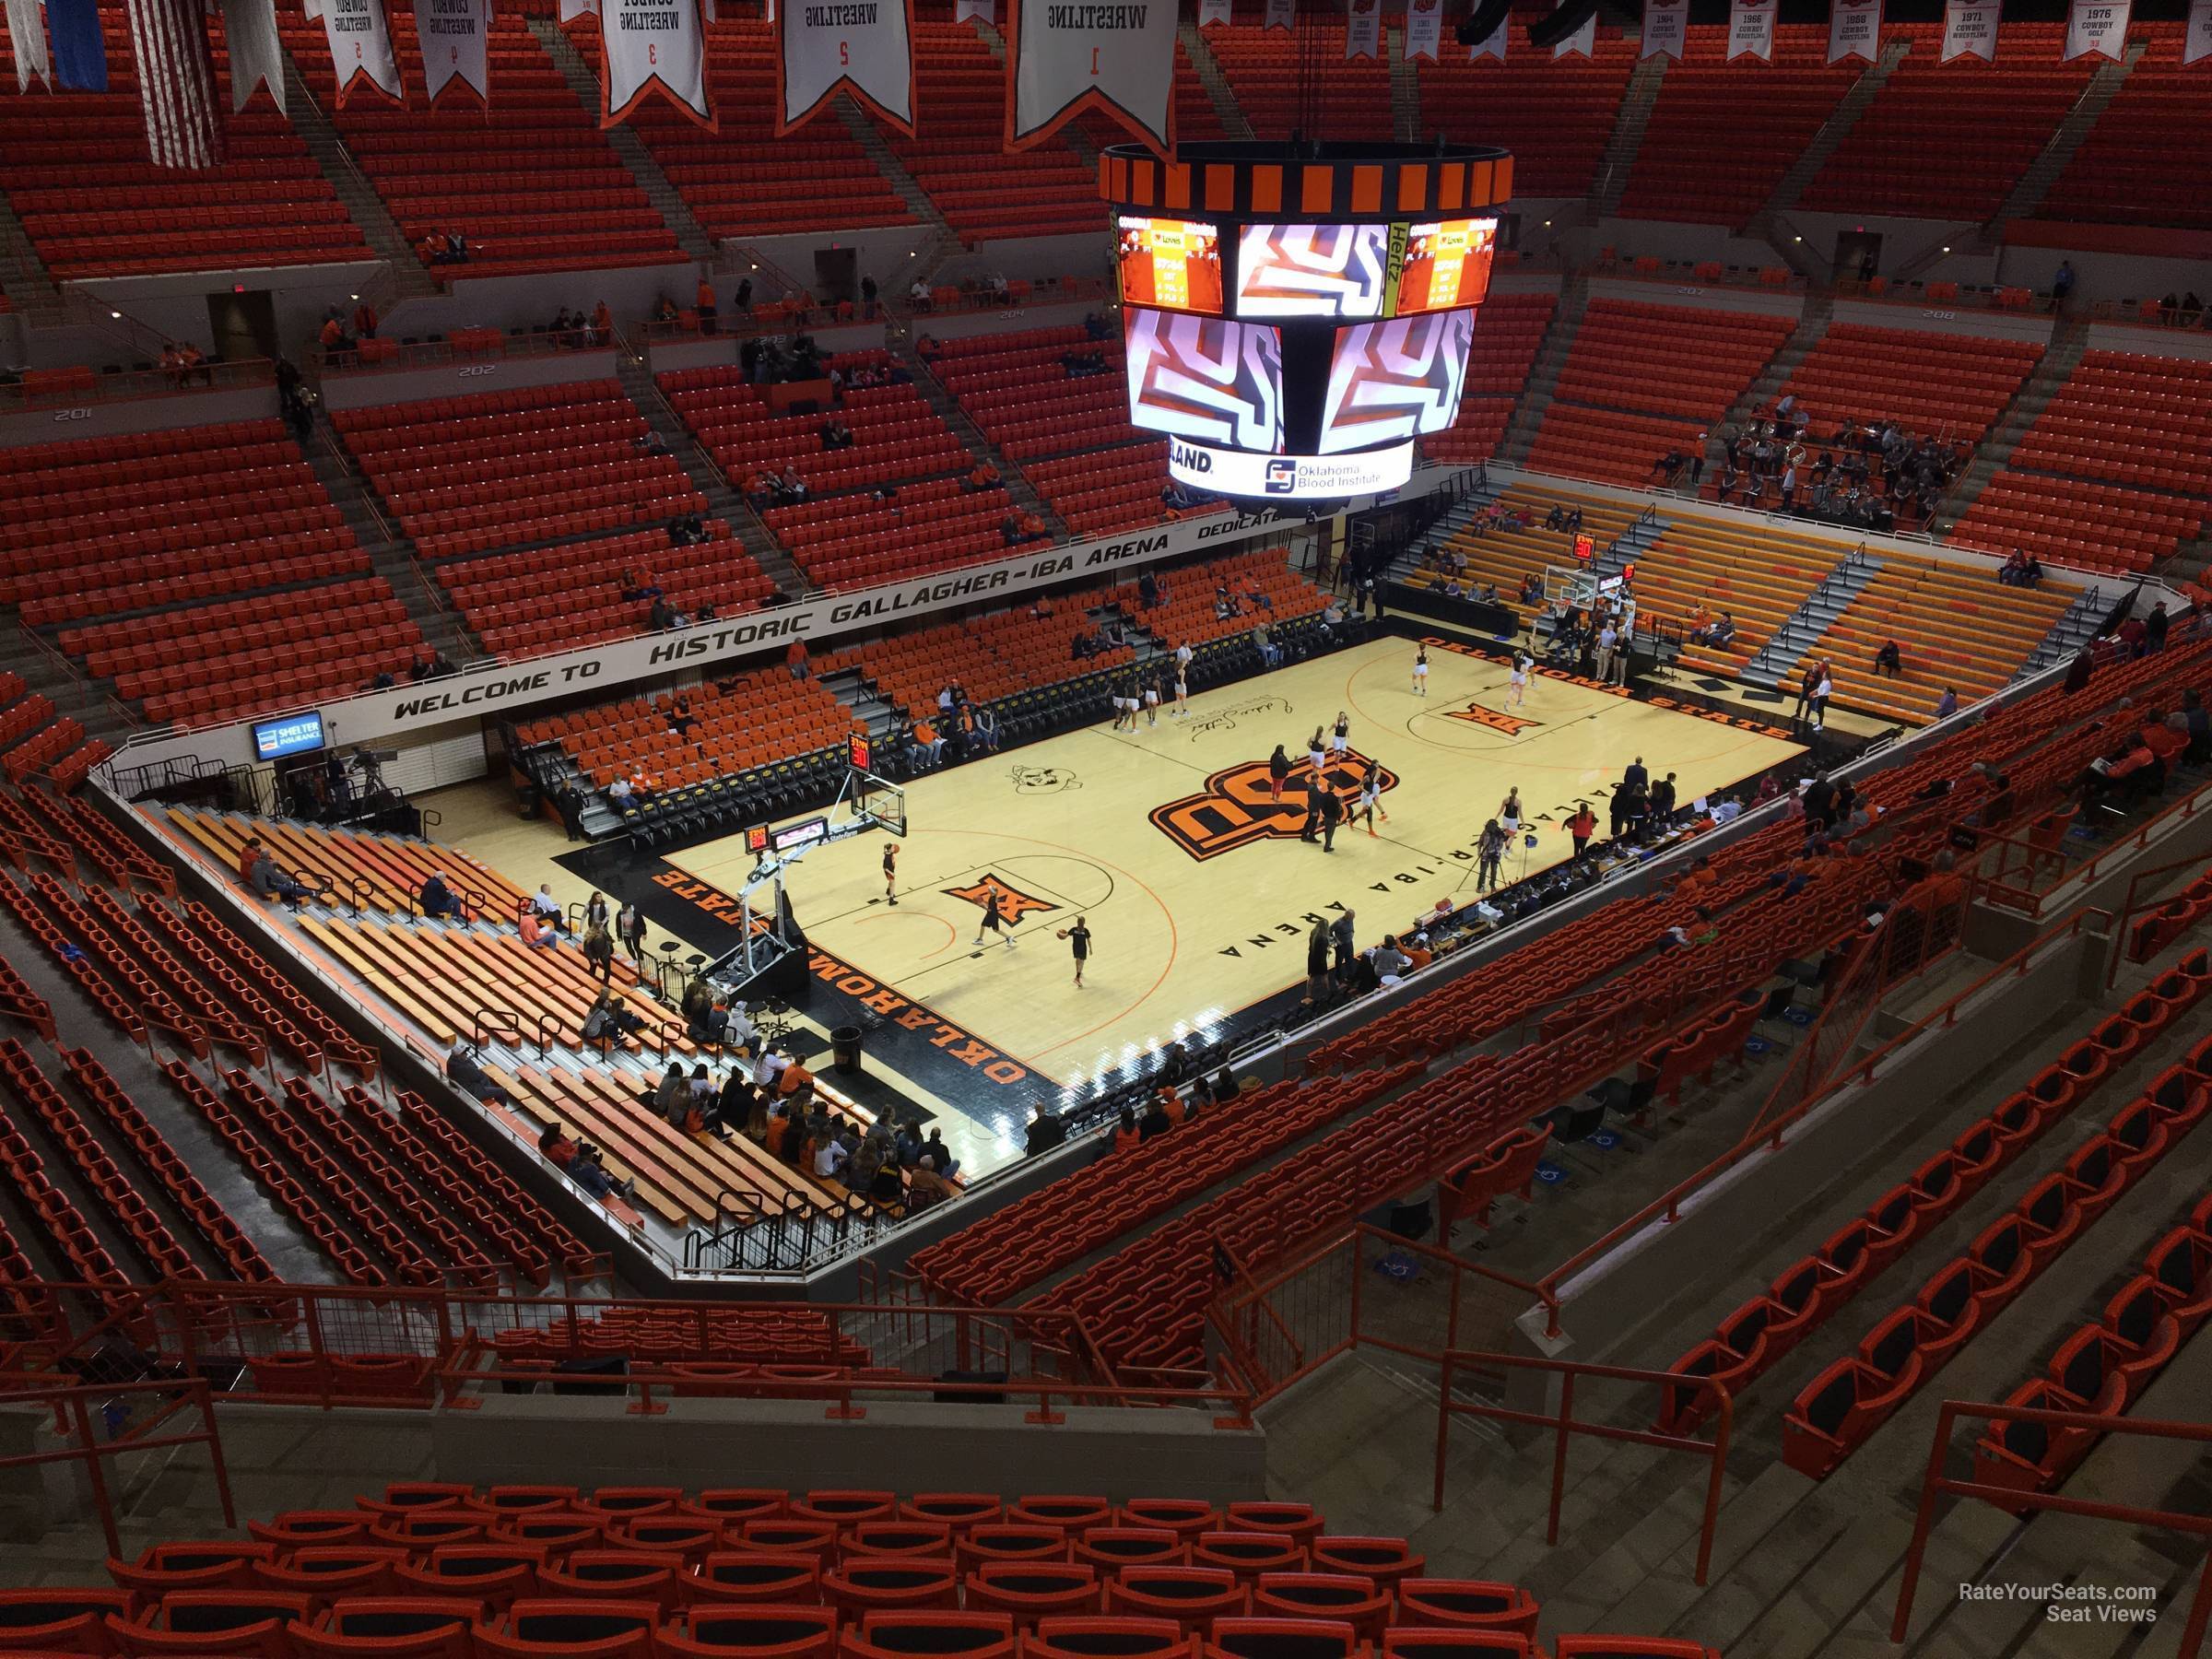 section 321, row 10 seat view  - gallagher-iba arena